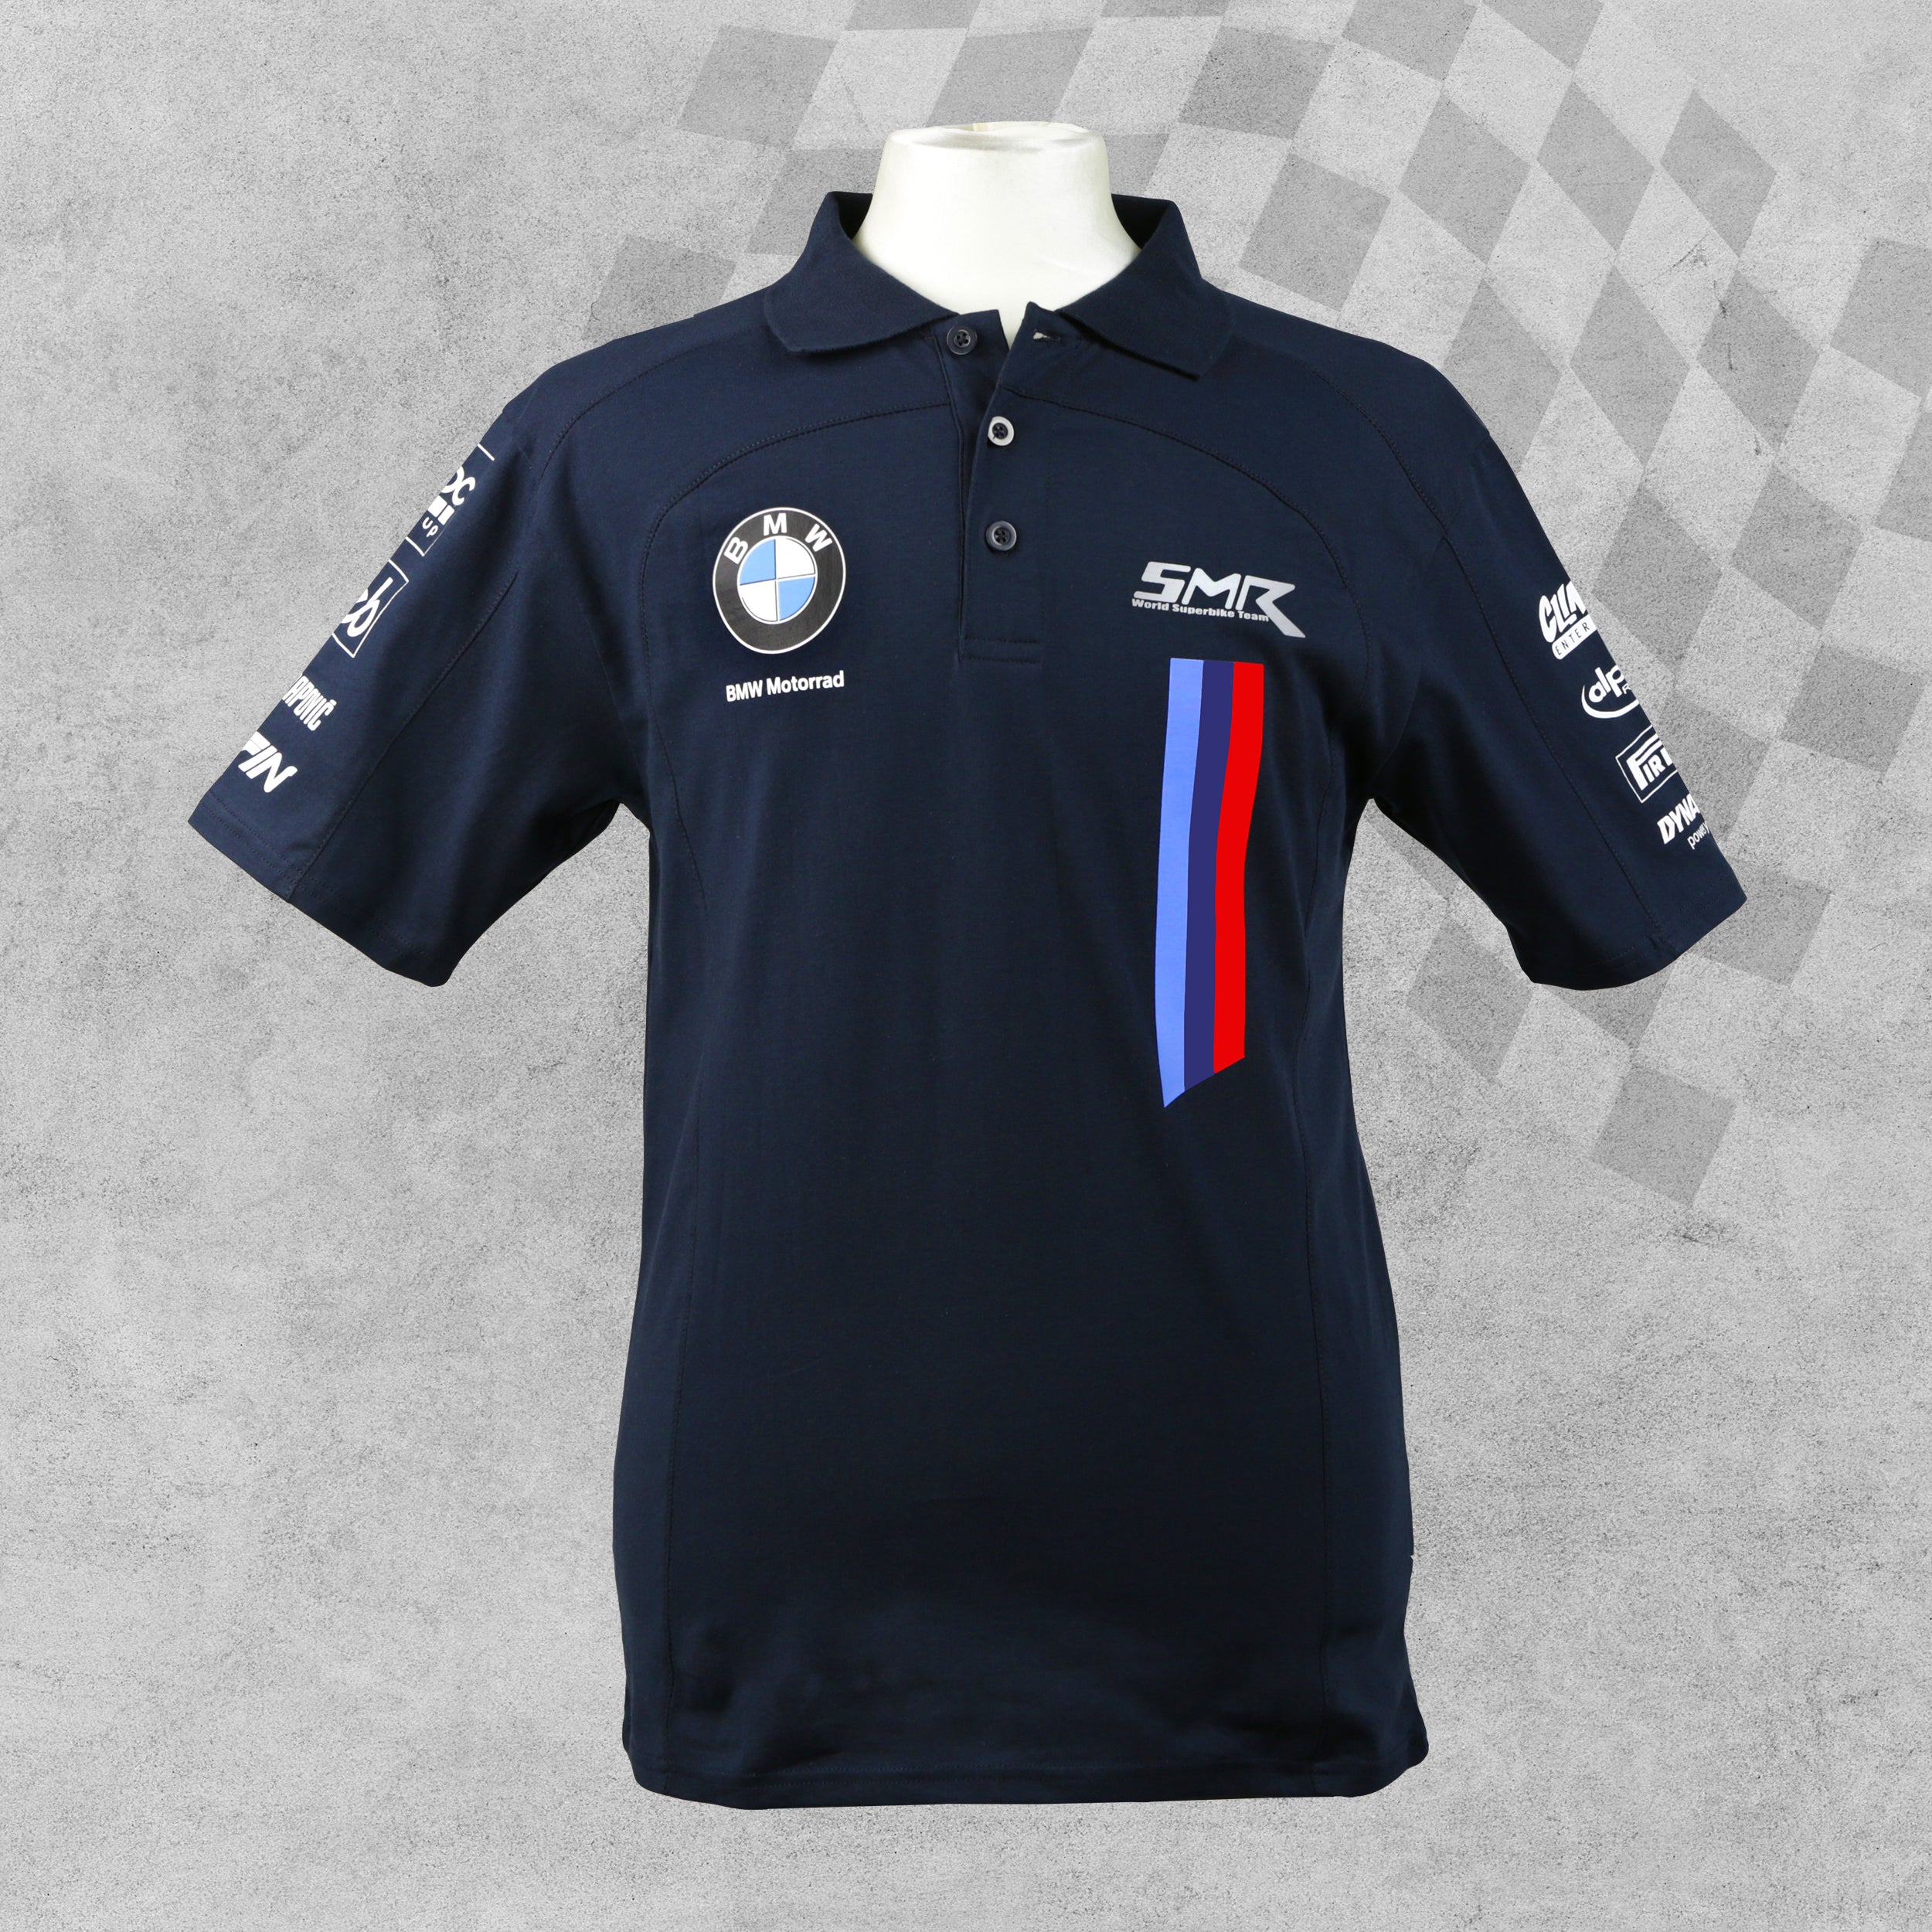 Motorrad WorldSBK Adult Polo Shirt by BMW, sold by In-Excess